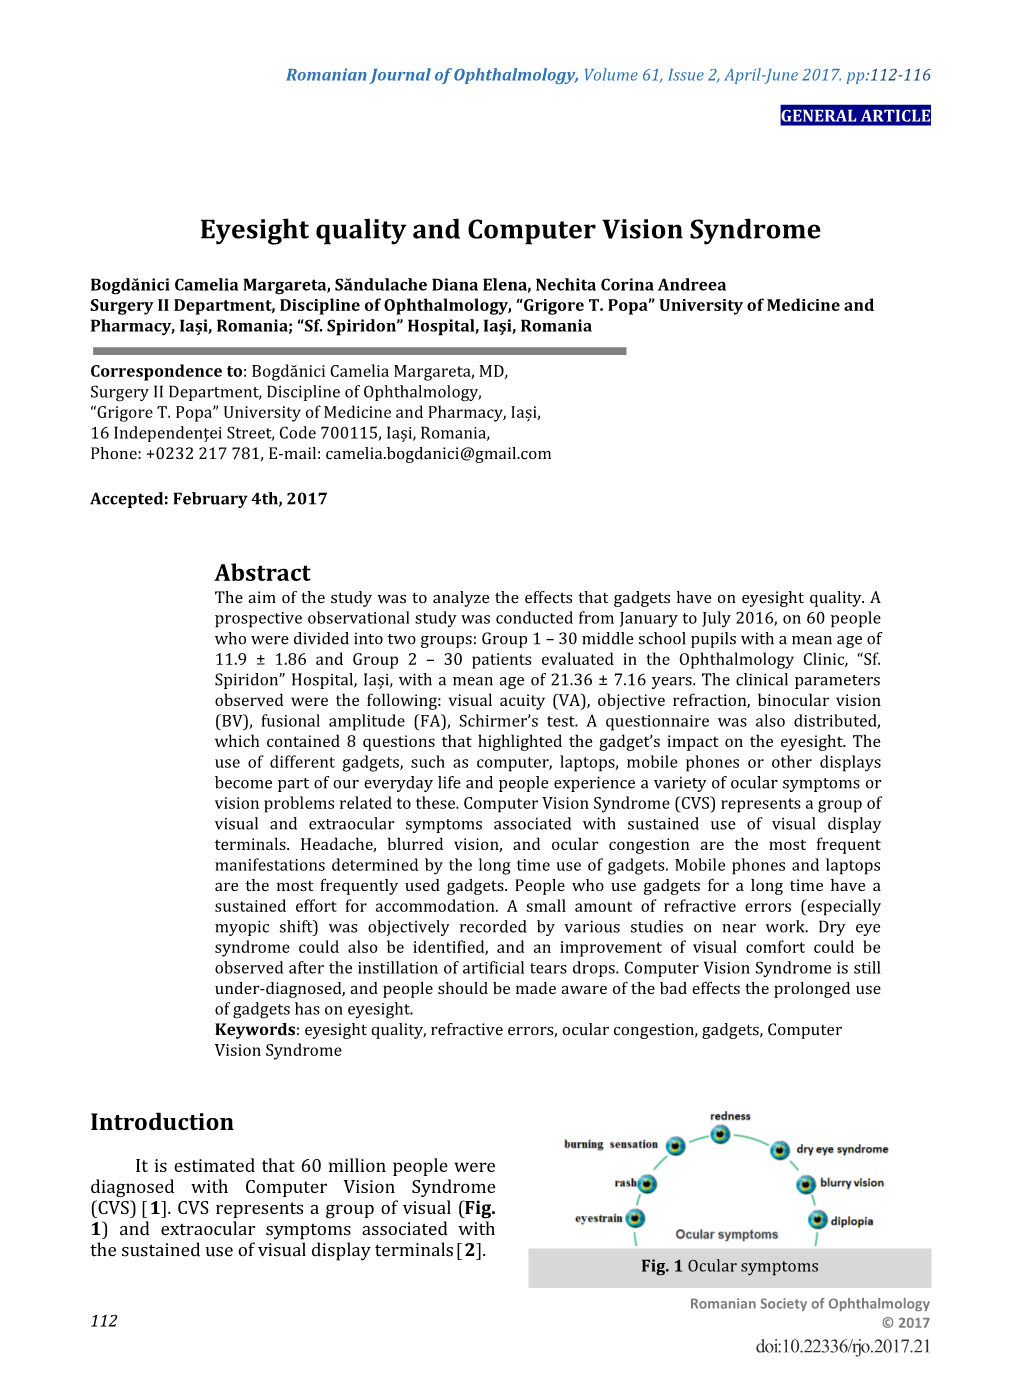 Eyesight Quality and Computer Vision Syndrome